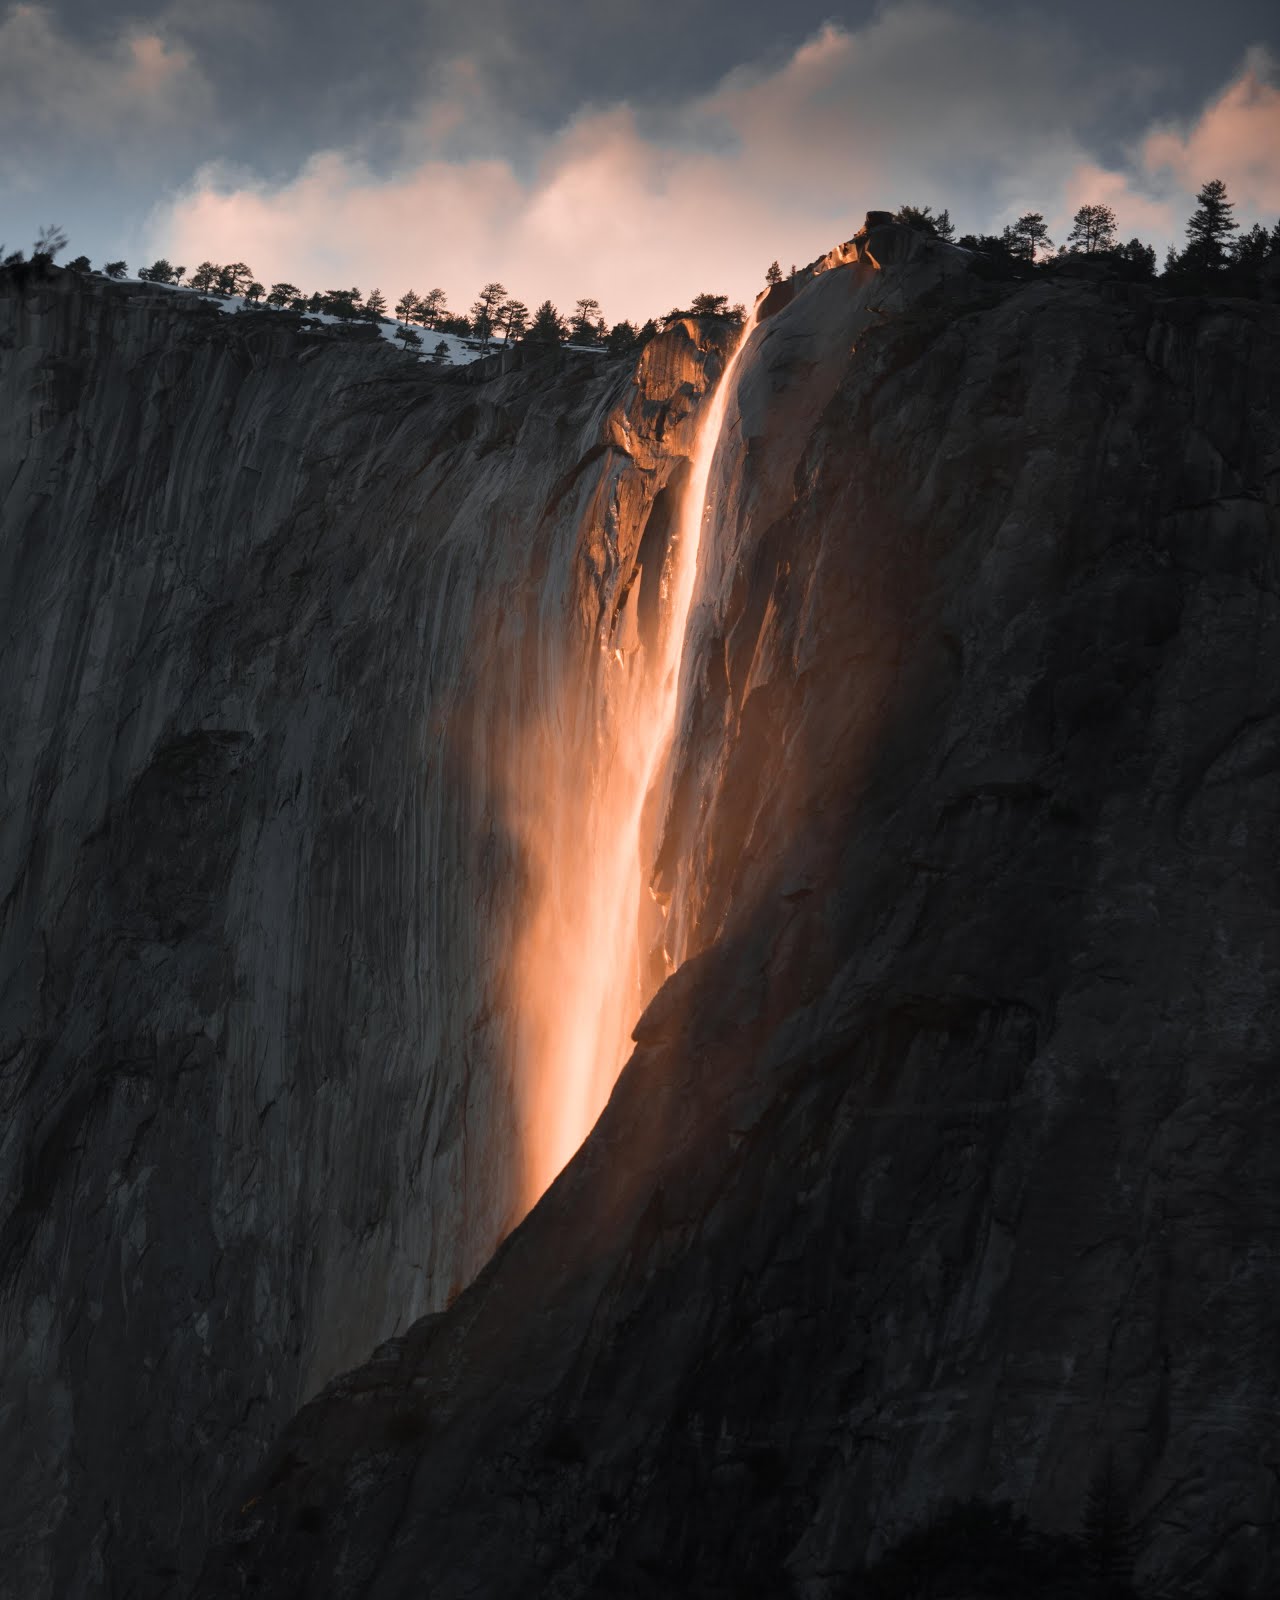 Waterfall in California's Yosemite National Park Also Know As The "Firefall."